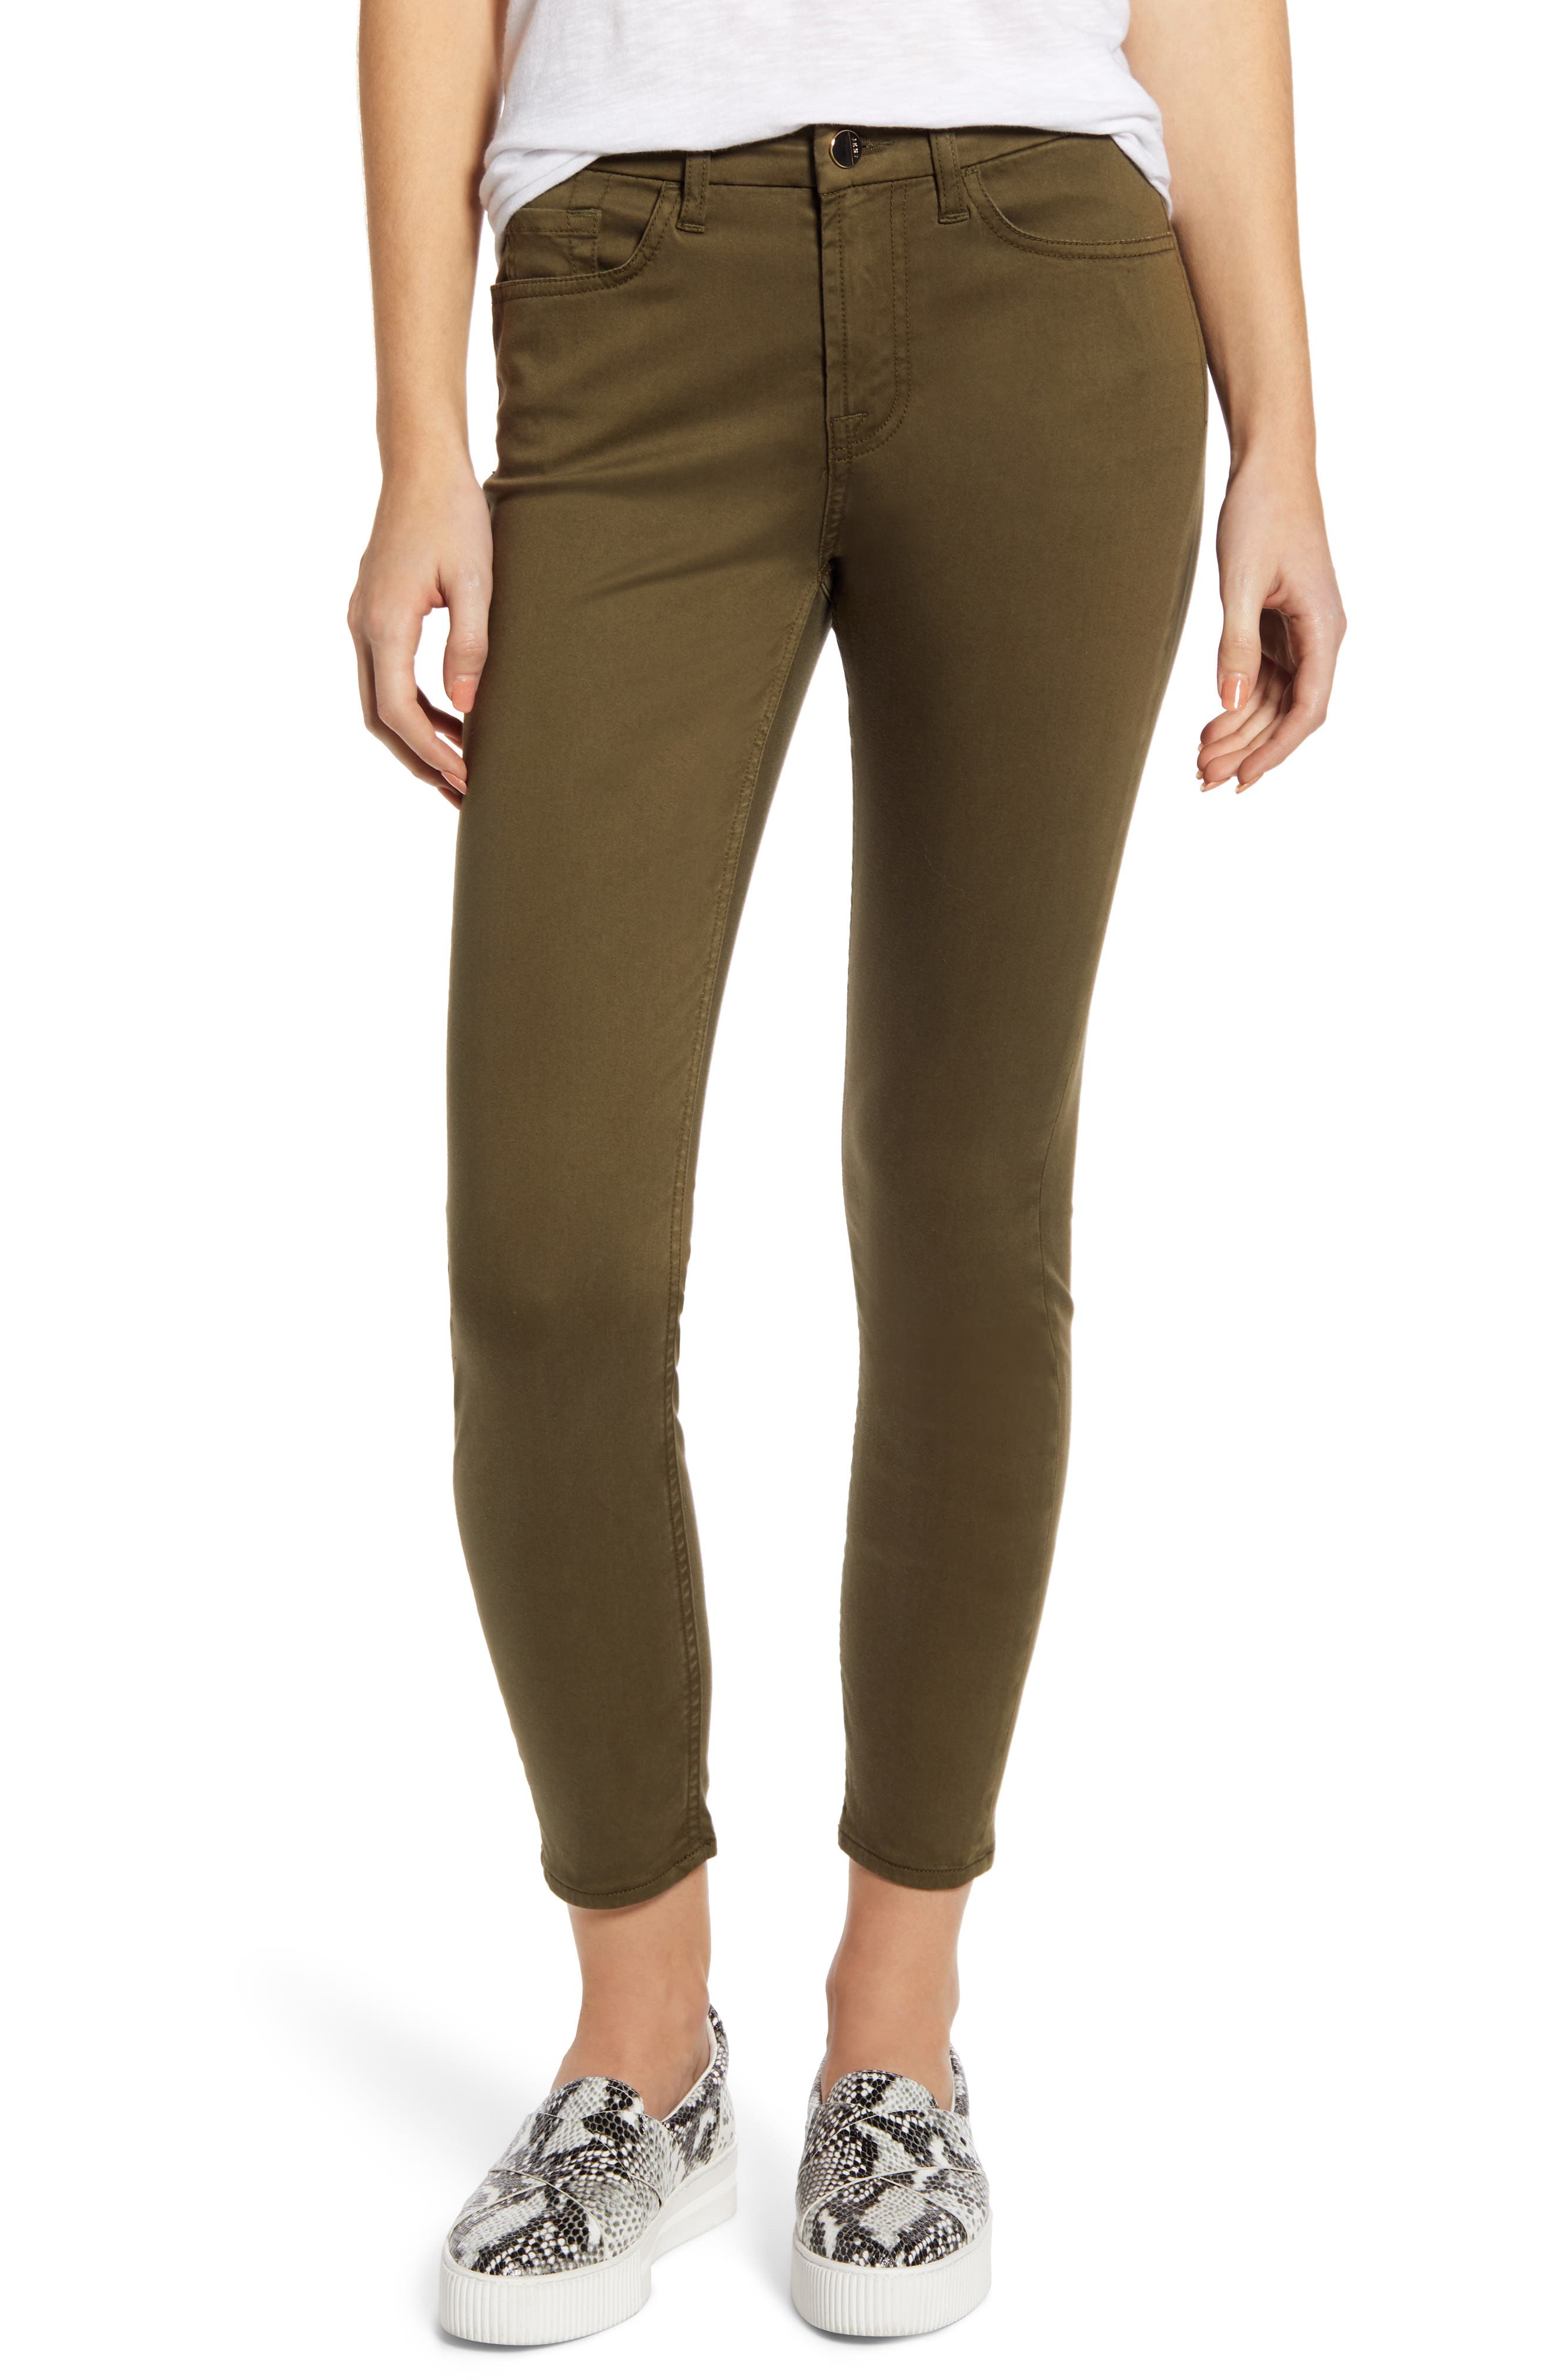 7 for all mankind sateen skinny